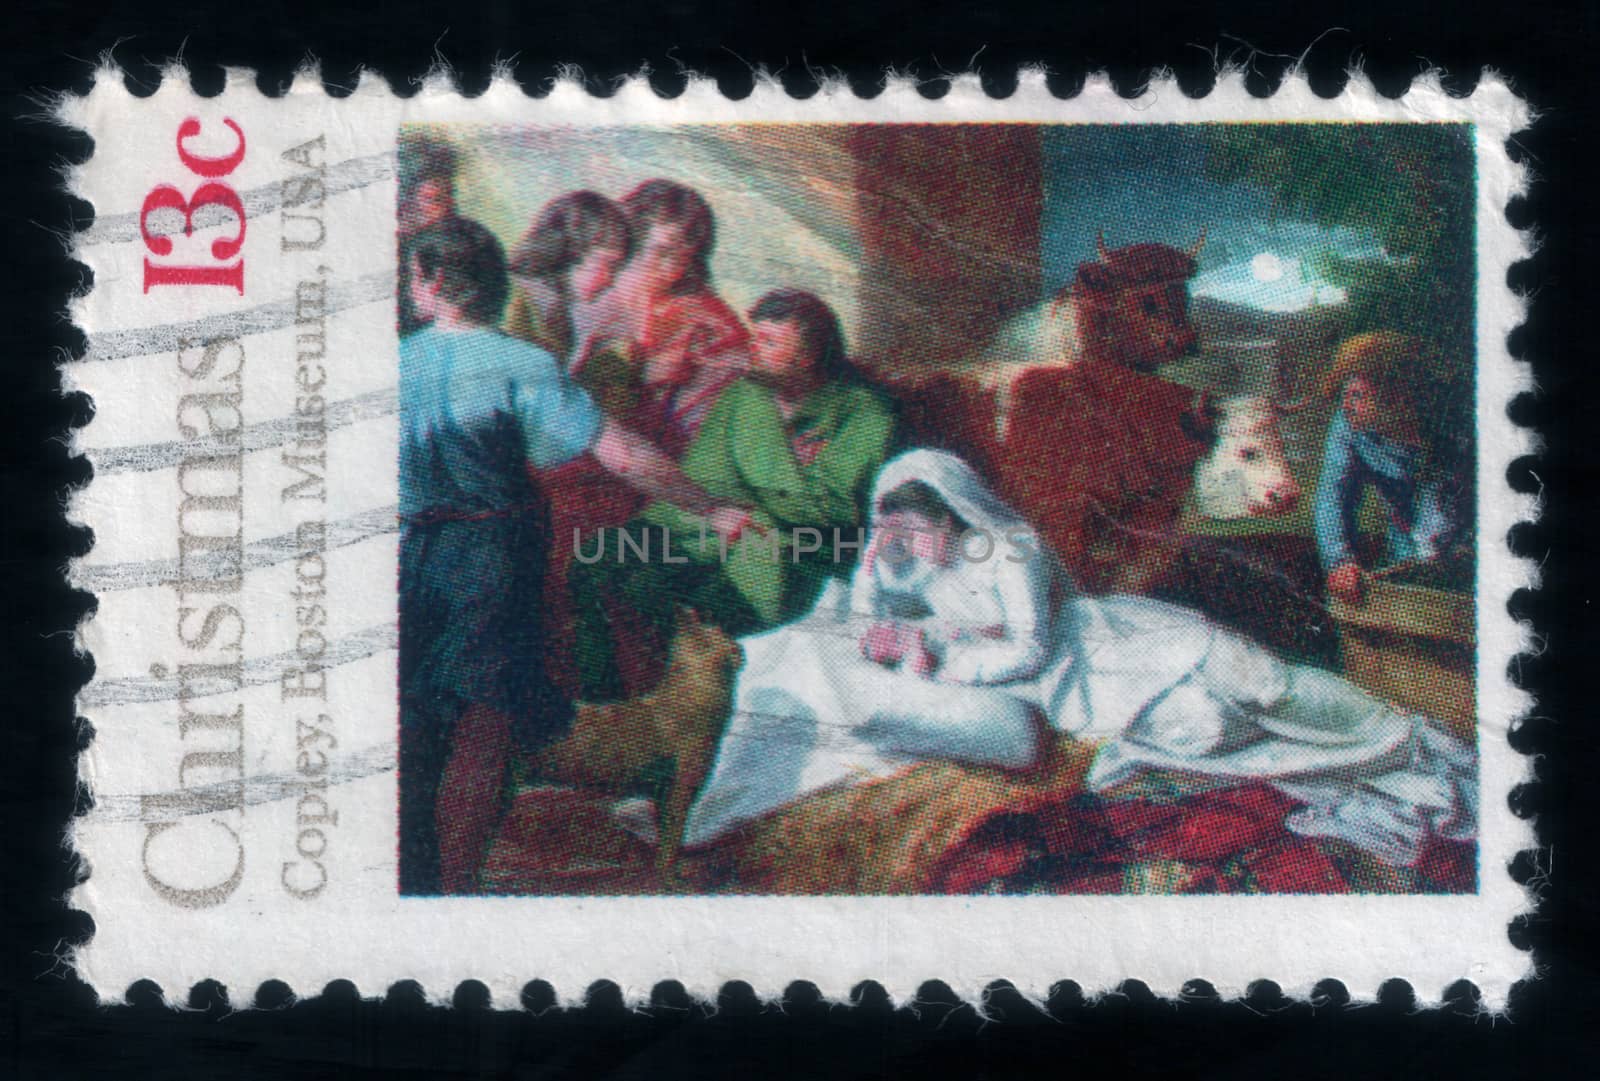 John Copley's painting, Boston Museum. Christmas Postage Stamp, uploaded in 2014